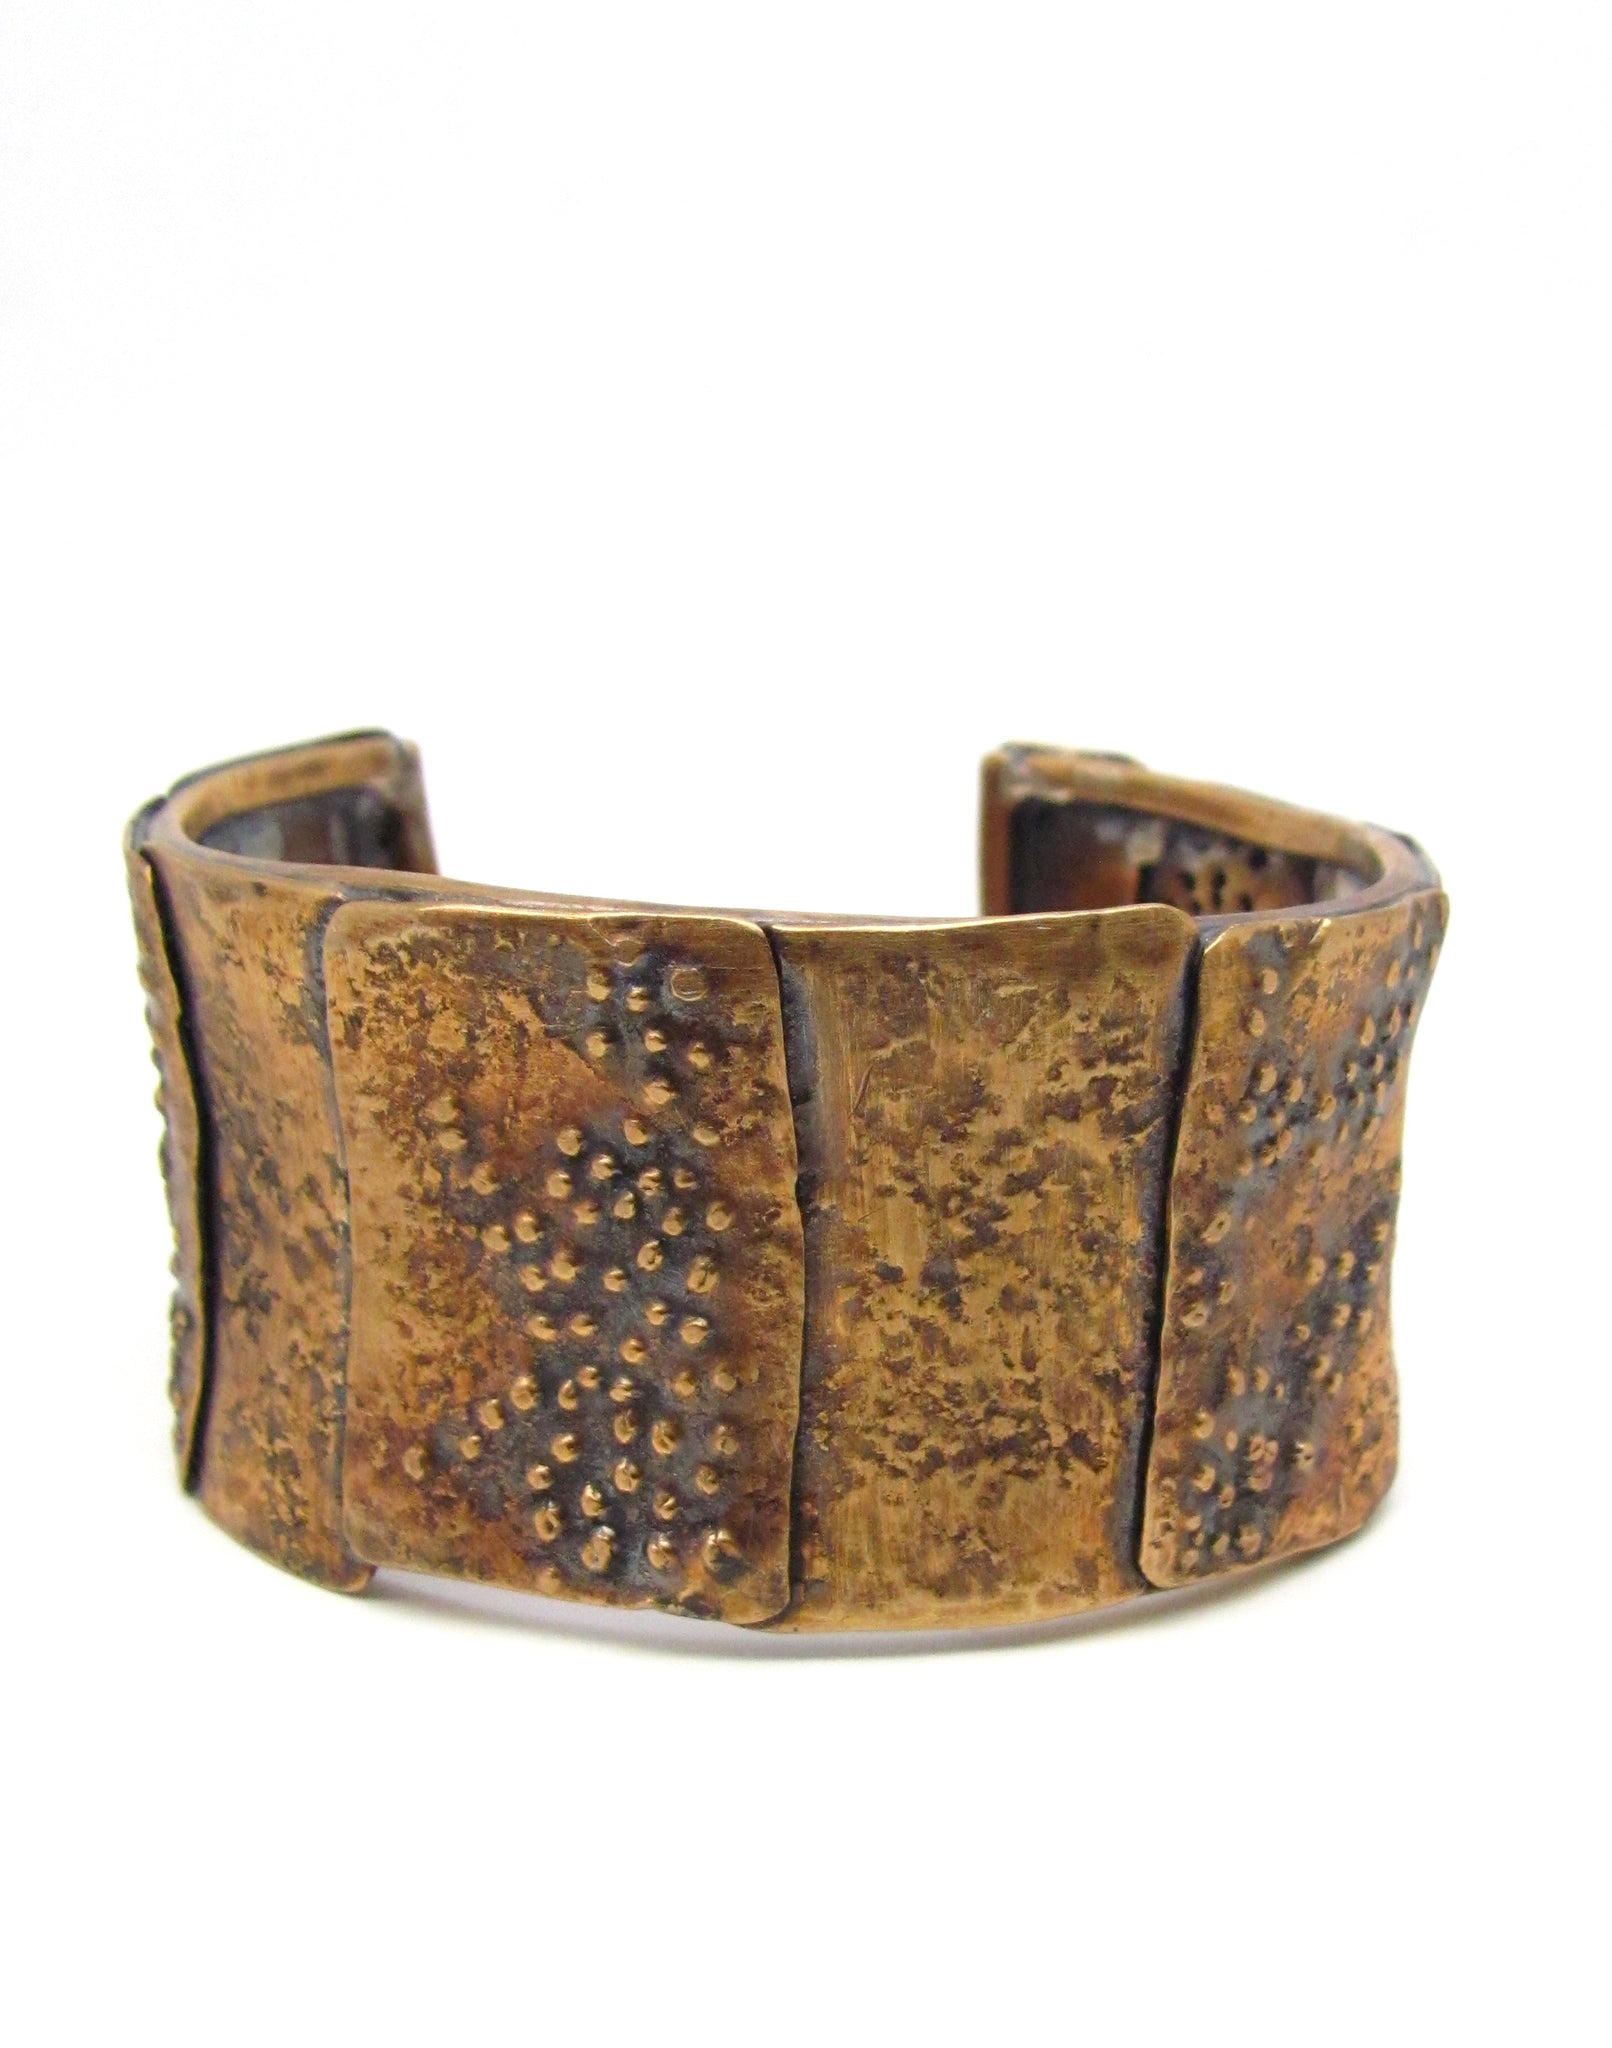 The Leopard Cuff Patchwork Style